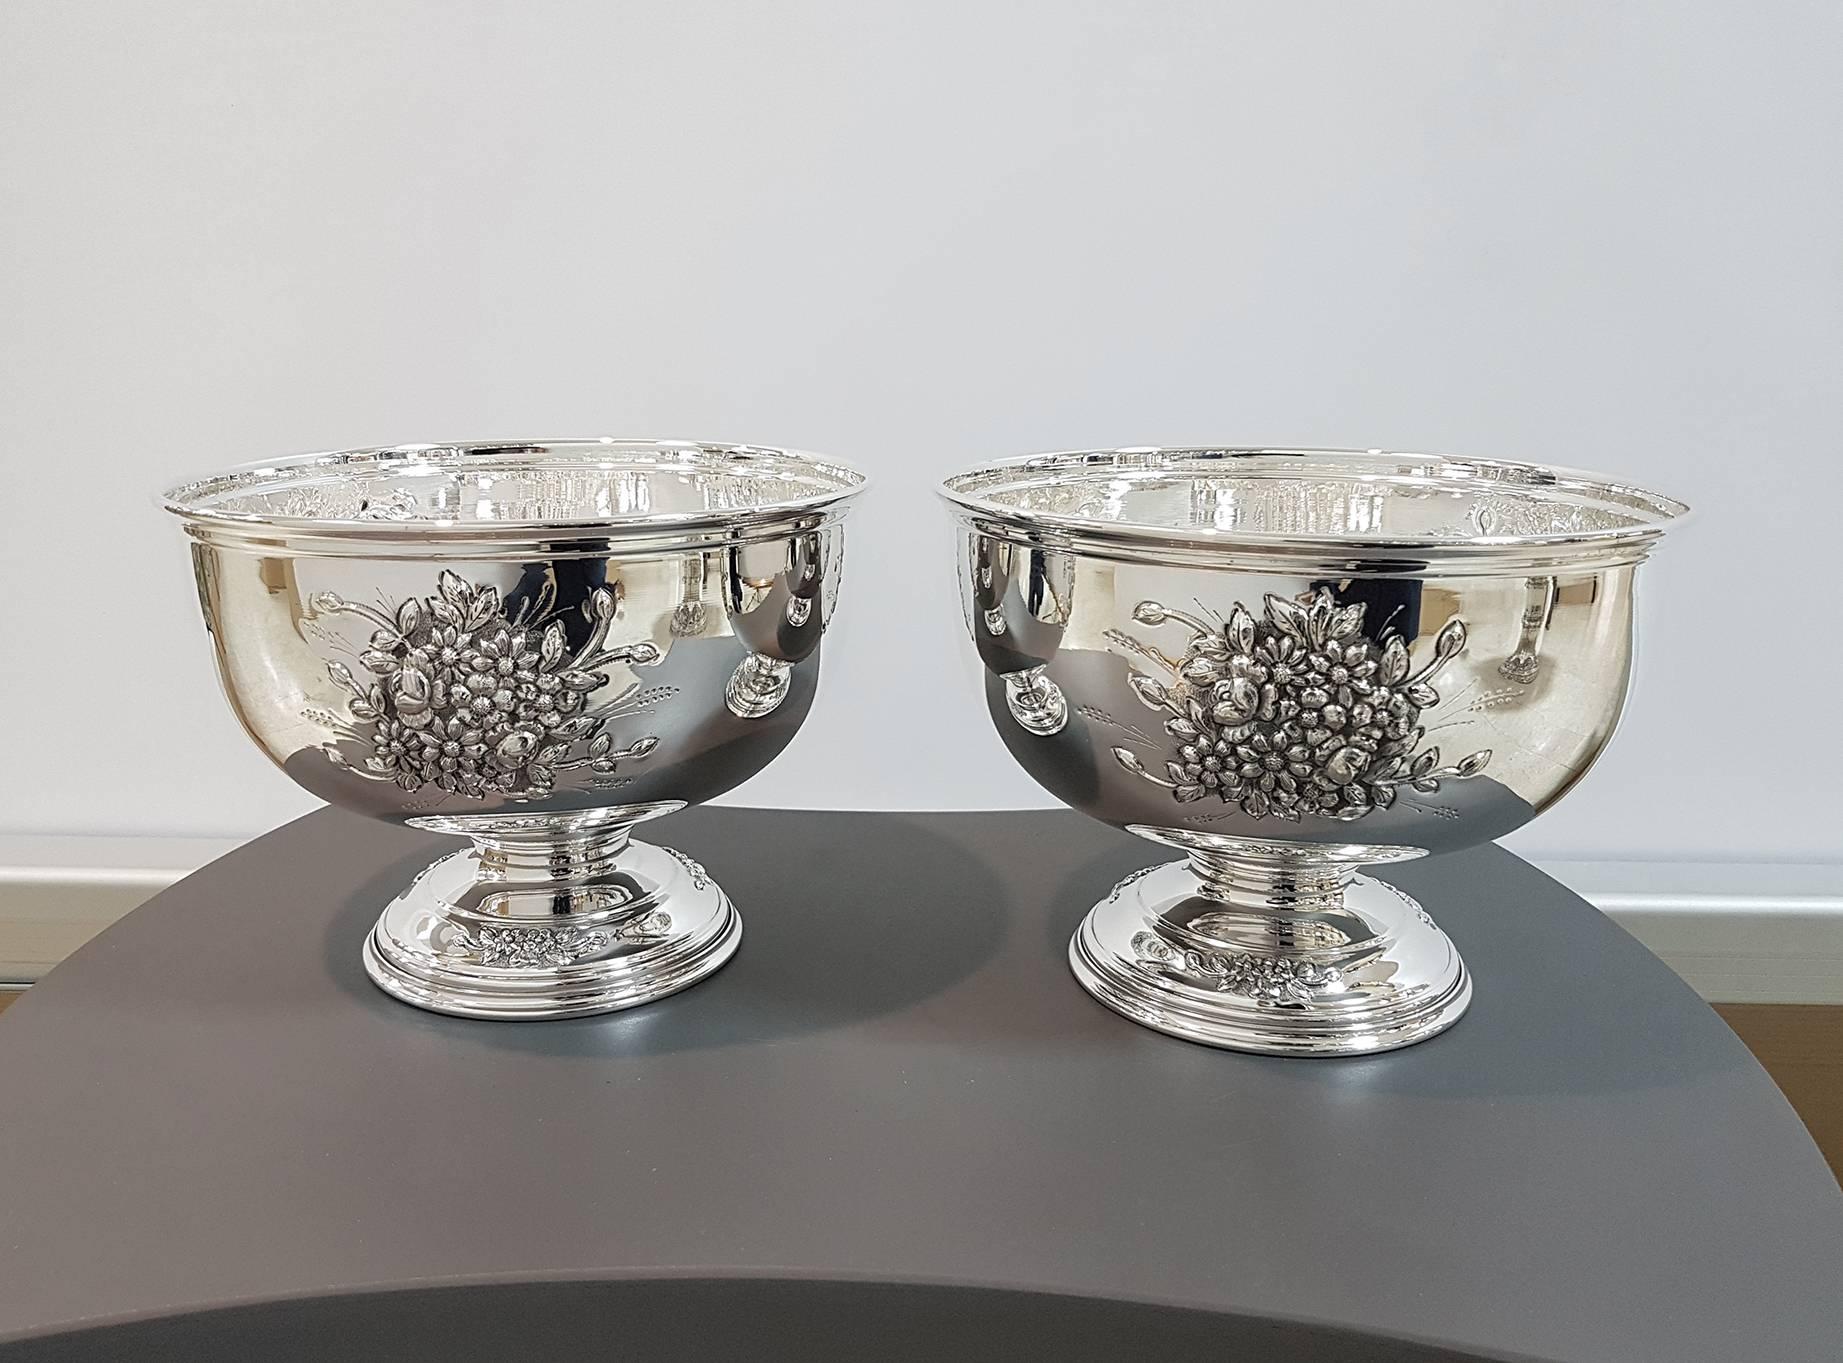 Pair of elegant solid silver 800 round centerpieces on base.
The embossing and chisels with floral motifs are in three sectors, symmetrical both on the body and on the base.
The centerpieces were made completely by hand.

2150 grams for both.